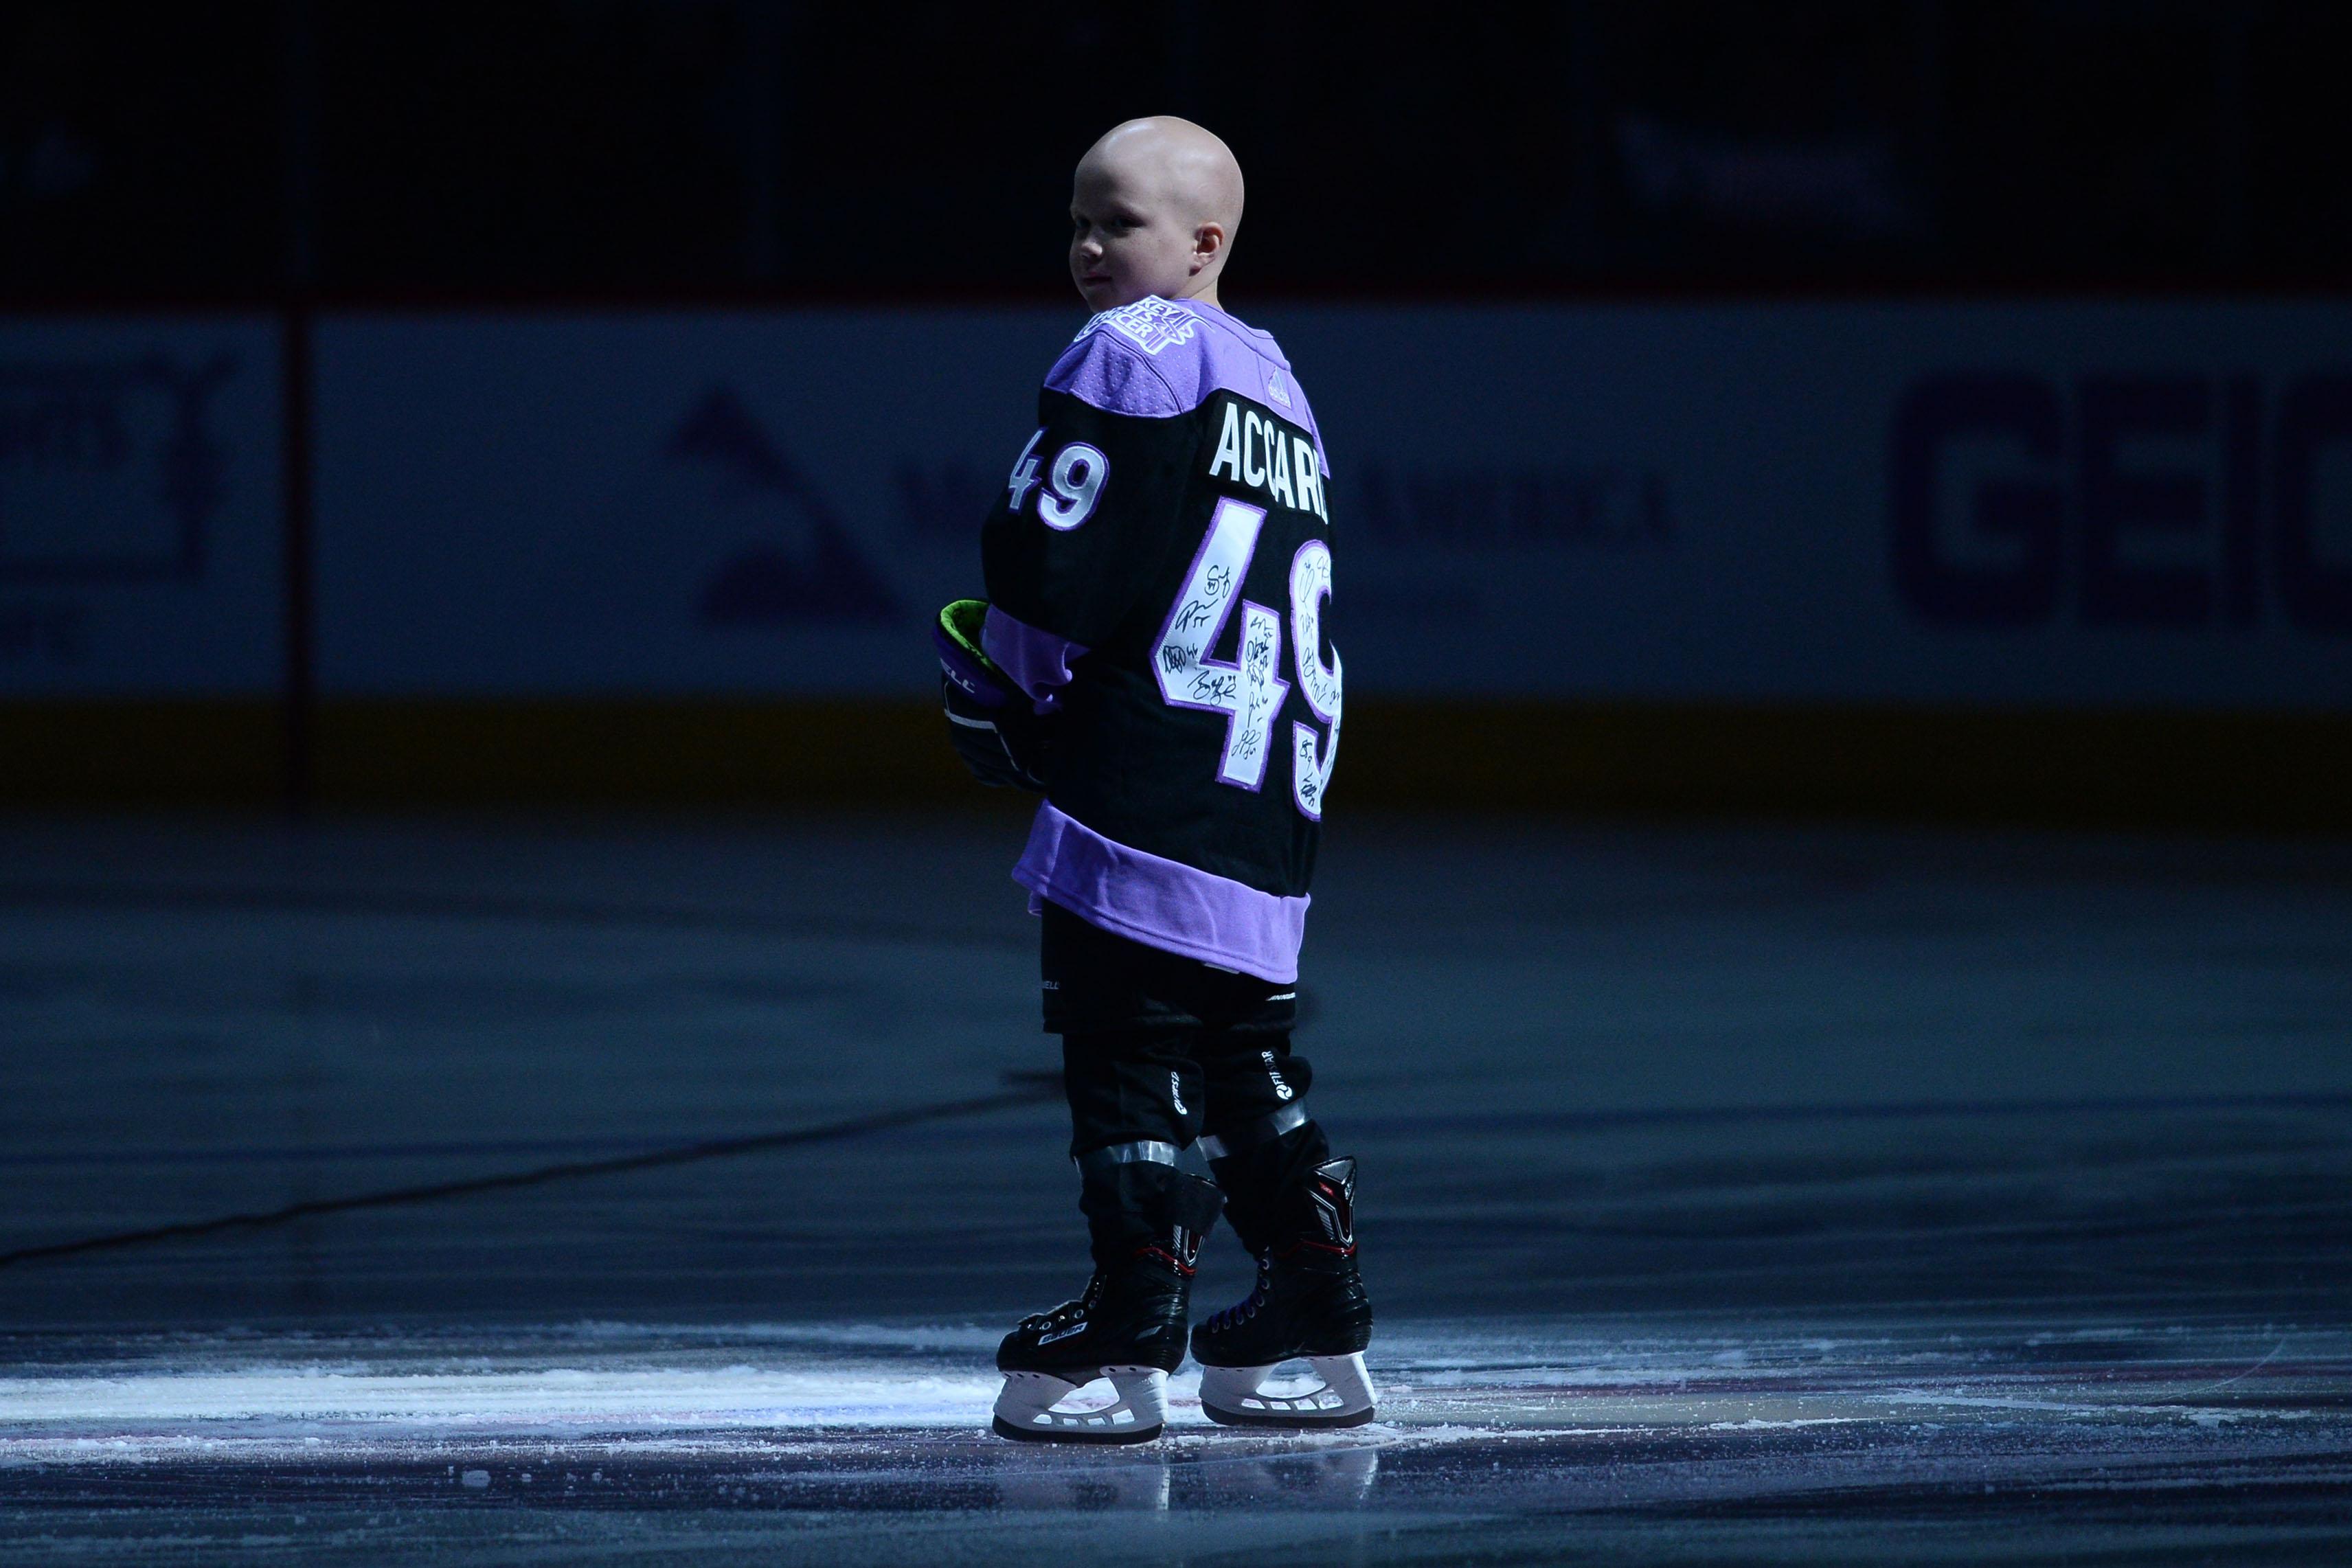 Nov 16, 2019; Glendale, AZ, USA; Cancer patient Leighton Accardo joins the Arizona Coyotes during the national anthems prior the first period against the Calgary Flames at Gila River Arena. / Joe Camporeale-USA TODAY Sports